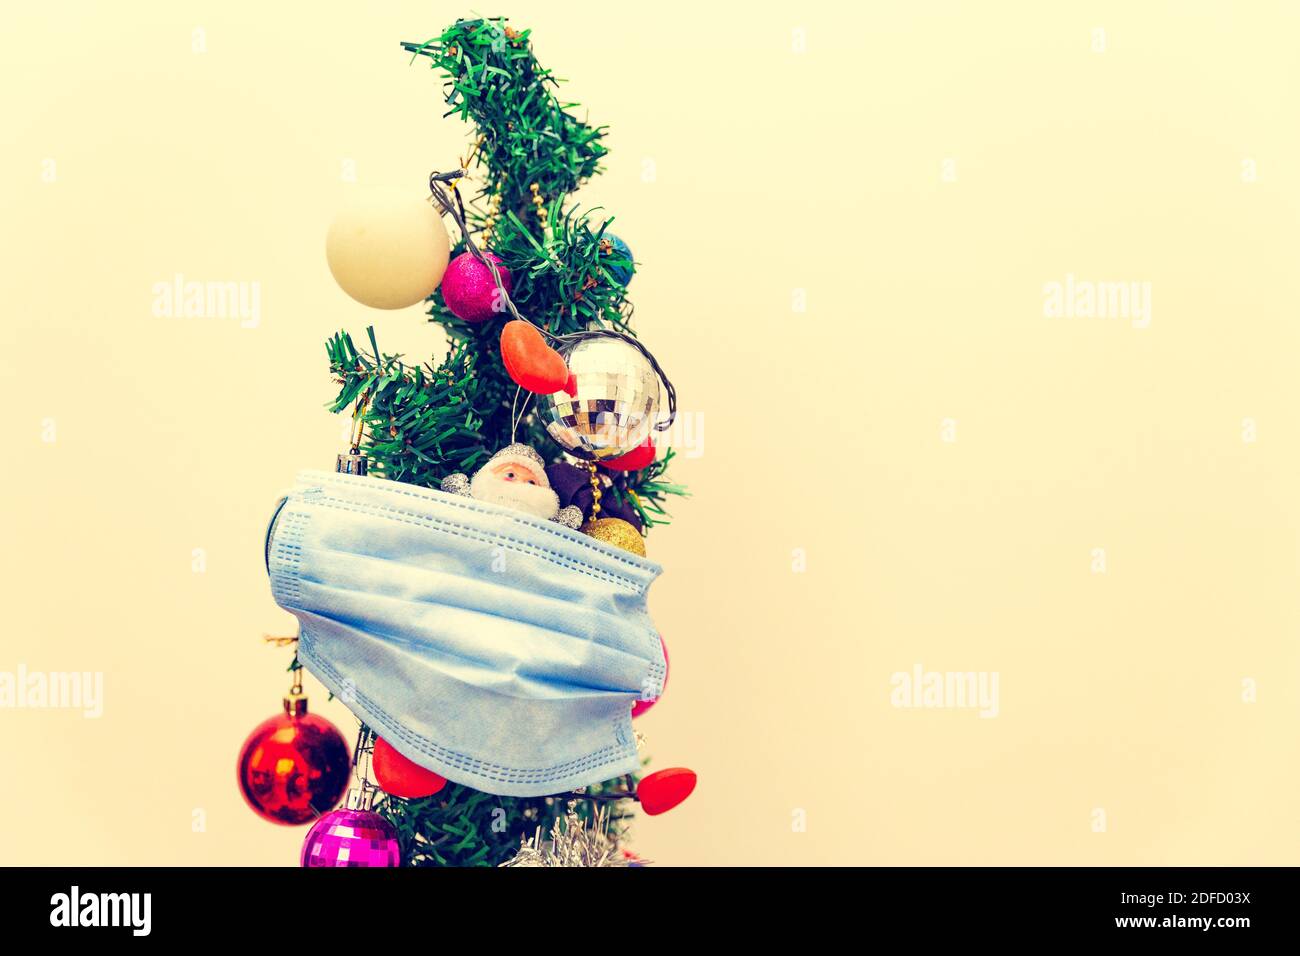 Merry Christmas in the new Covid-19. Front view of a Christmas tree with medical face mask. The concept of the new year during the pandemic. Stock Photo